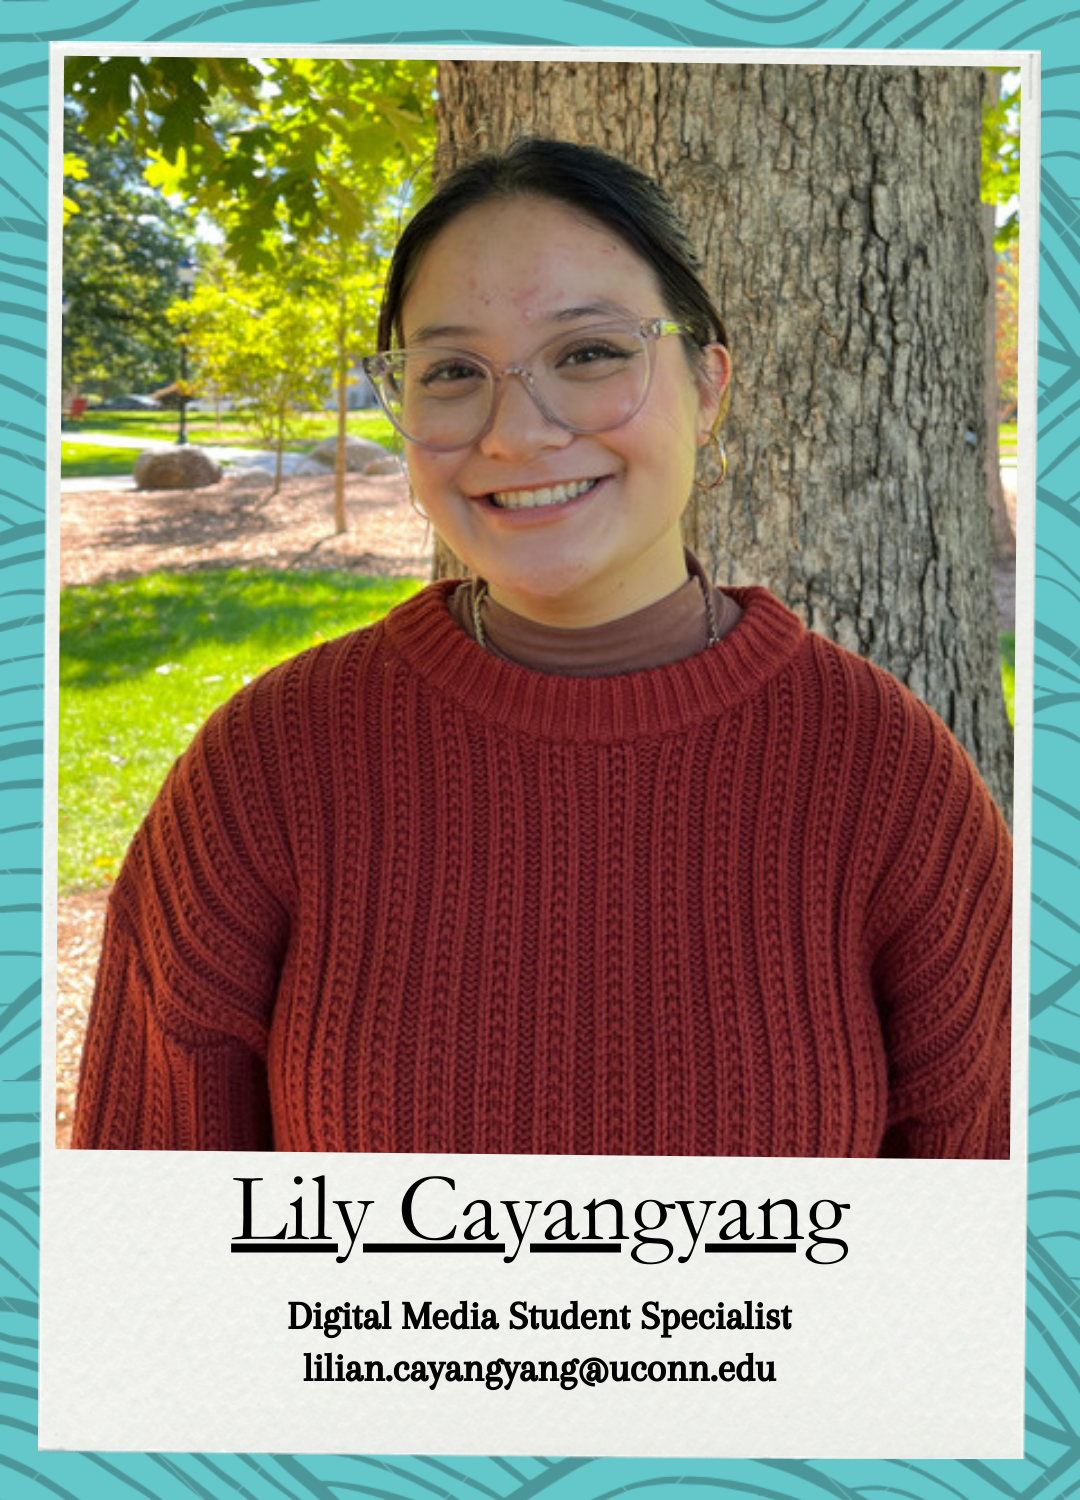 Lily Cayangyang